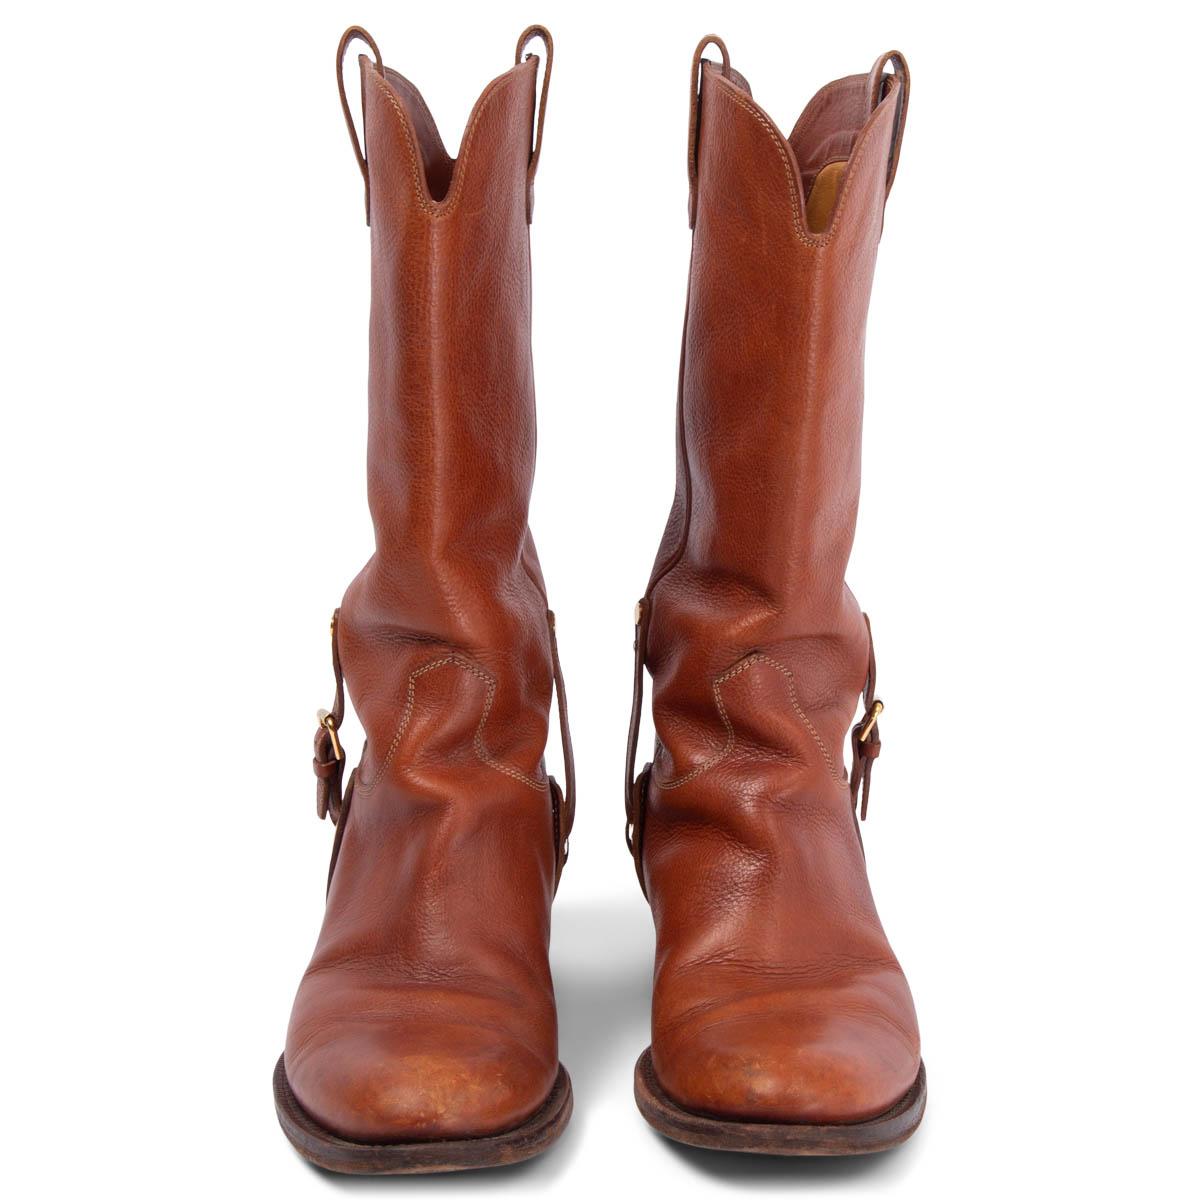 100% authentic Ralph Lauren Collection Vintage western cowboy boots in cognac brown calfskin with gold-tone hardware. Have been worn and are in good condition. 

Measurements
Imprinted Size	8B
Shoe Size	38.5
Inside Sole	26cm (10.1in)
Width	8cm